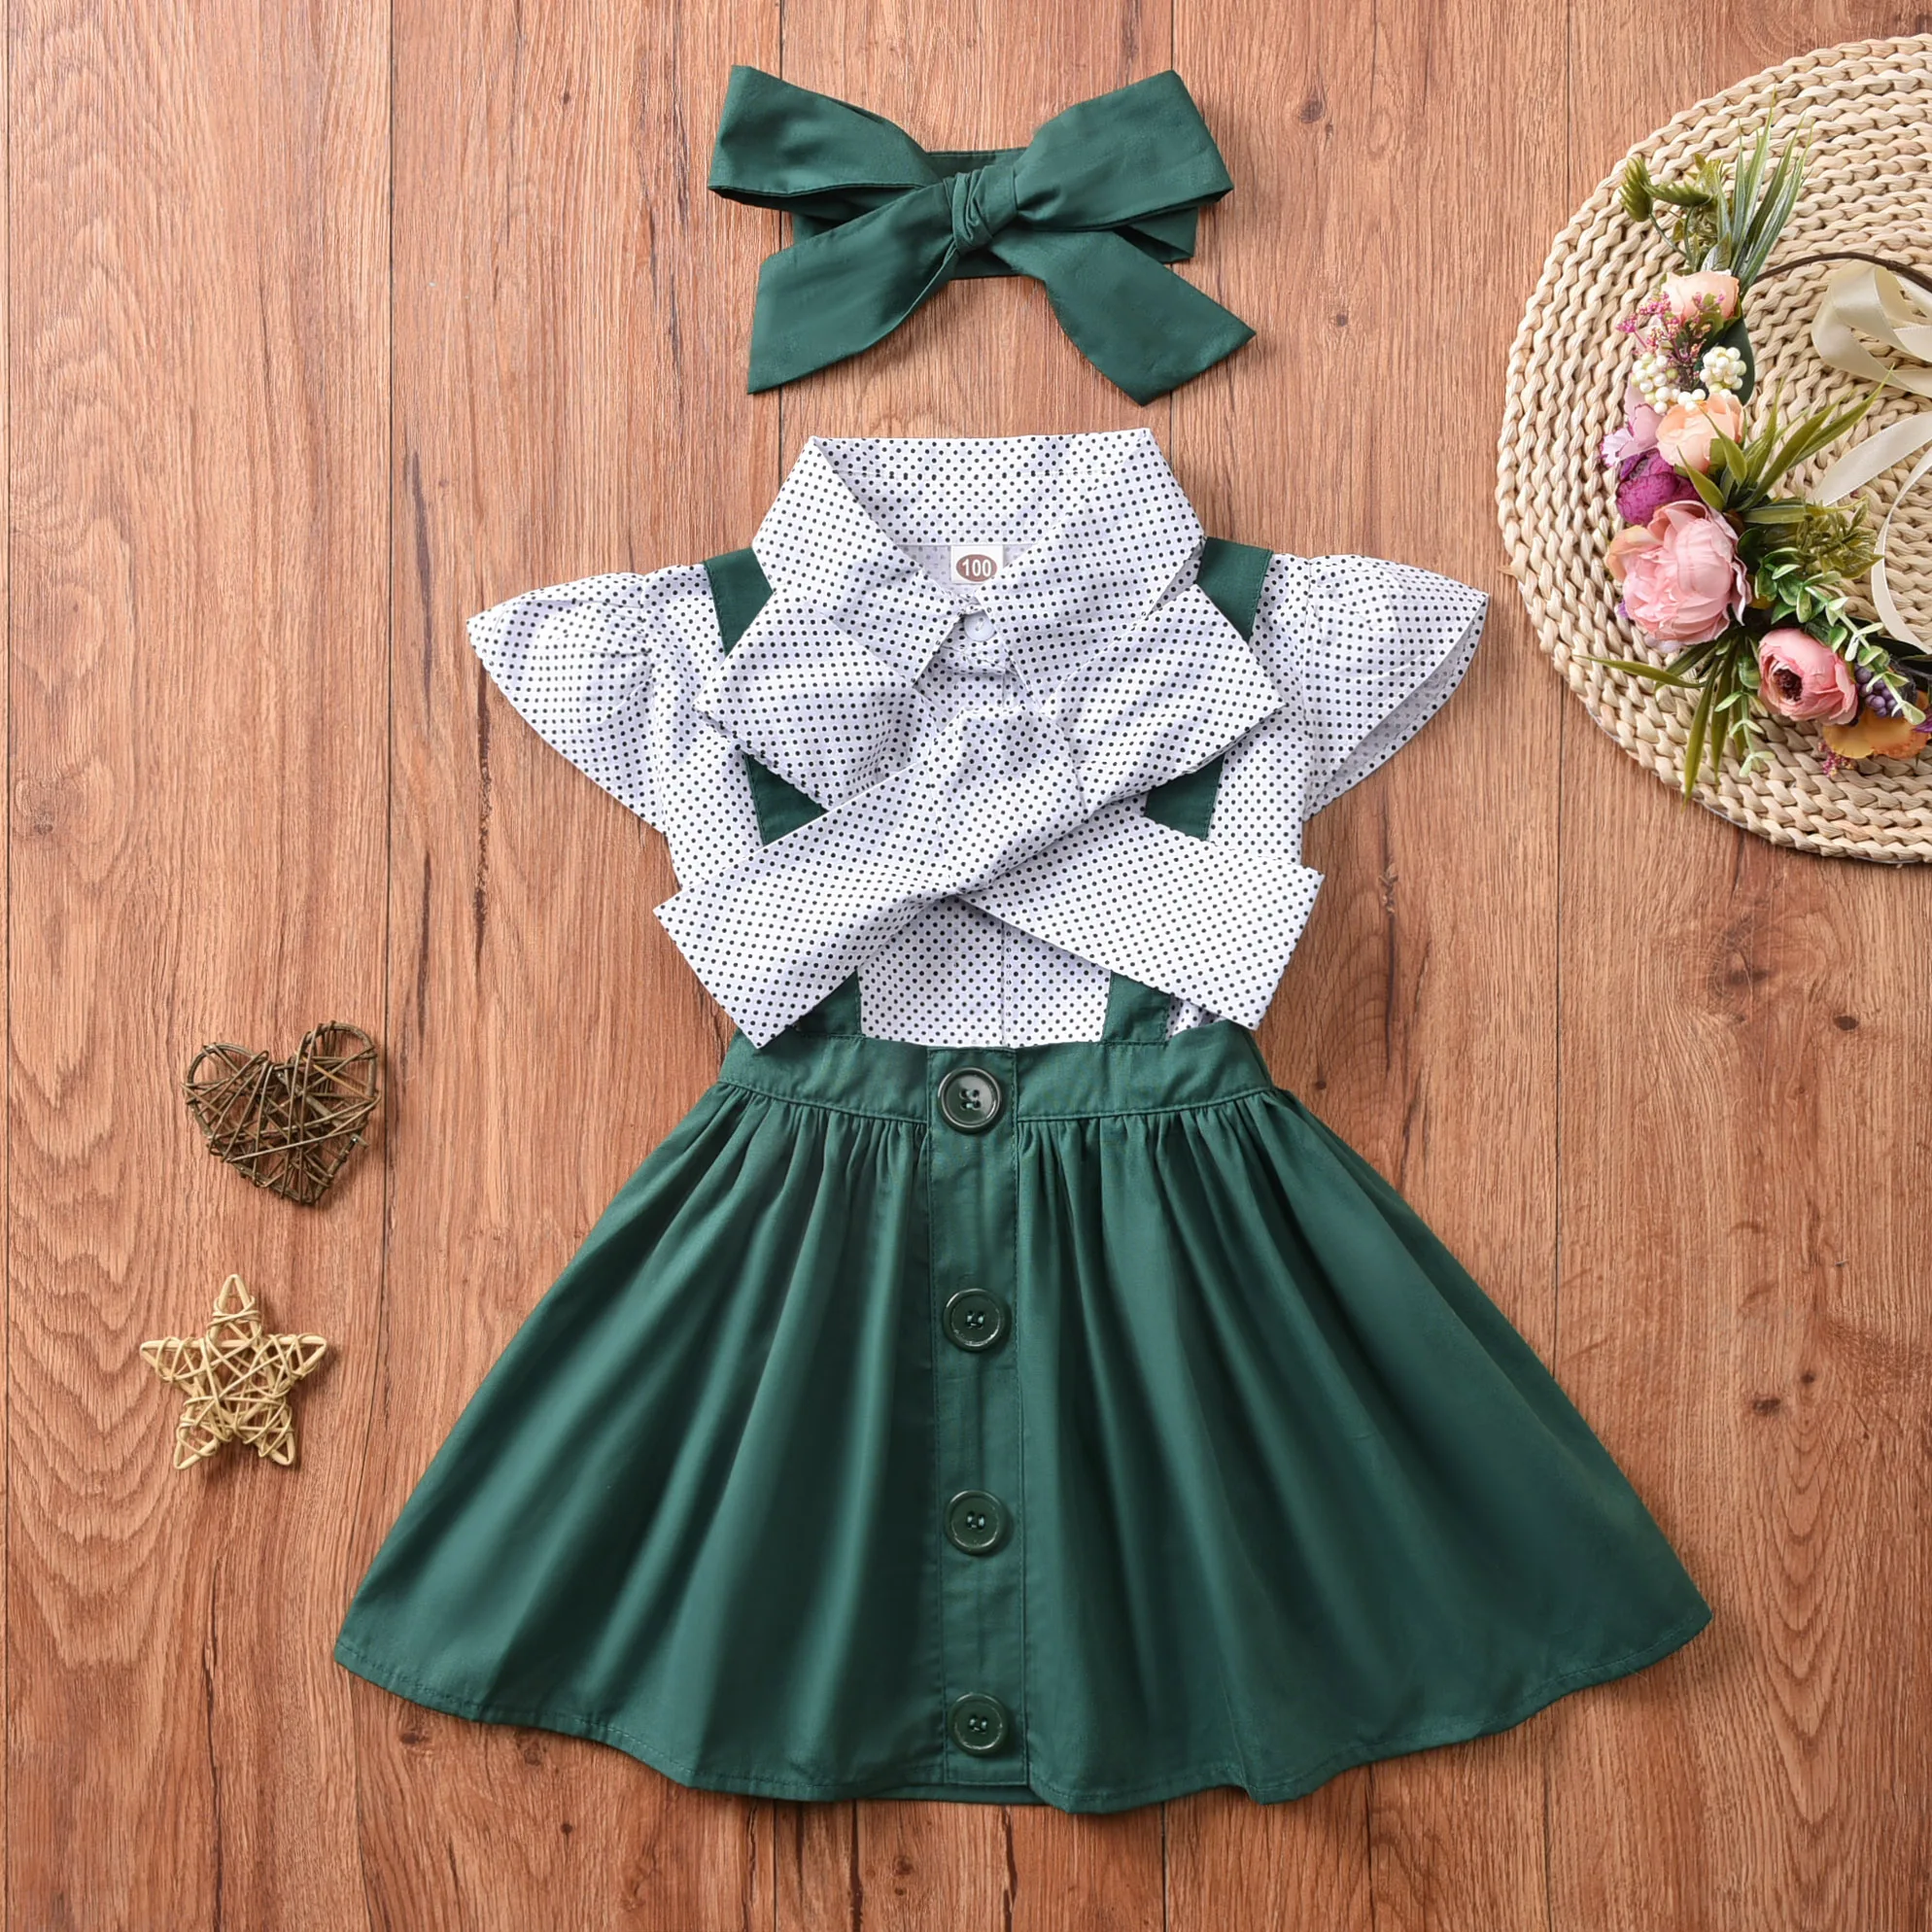 2Pcs Newborn Baby Bow-tie Lace Tops Shirt Plaid Skater Skirt Clothes Outfit Sets